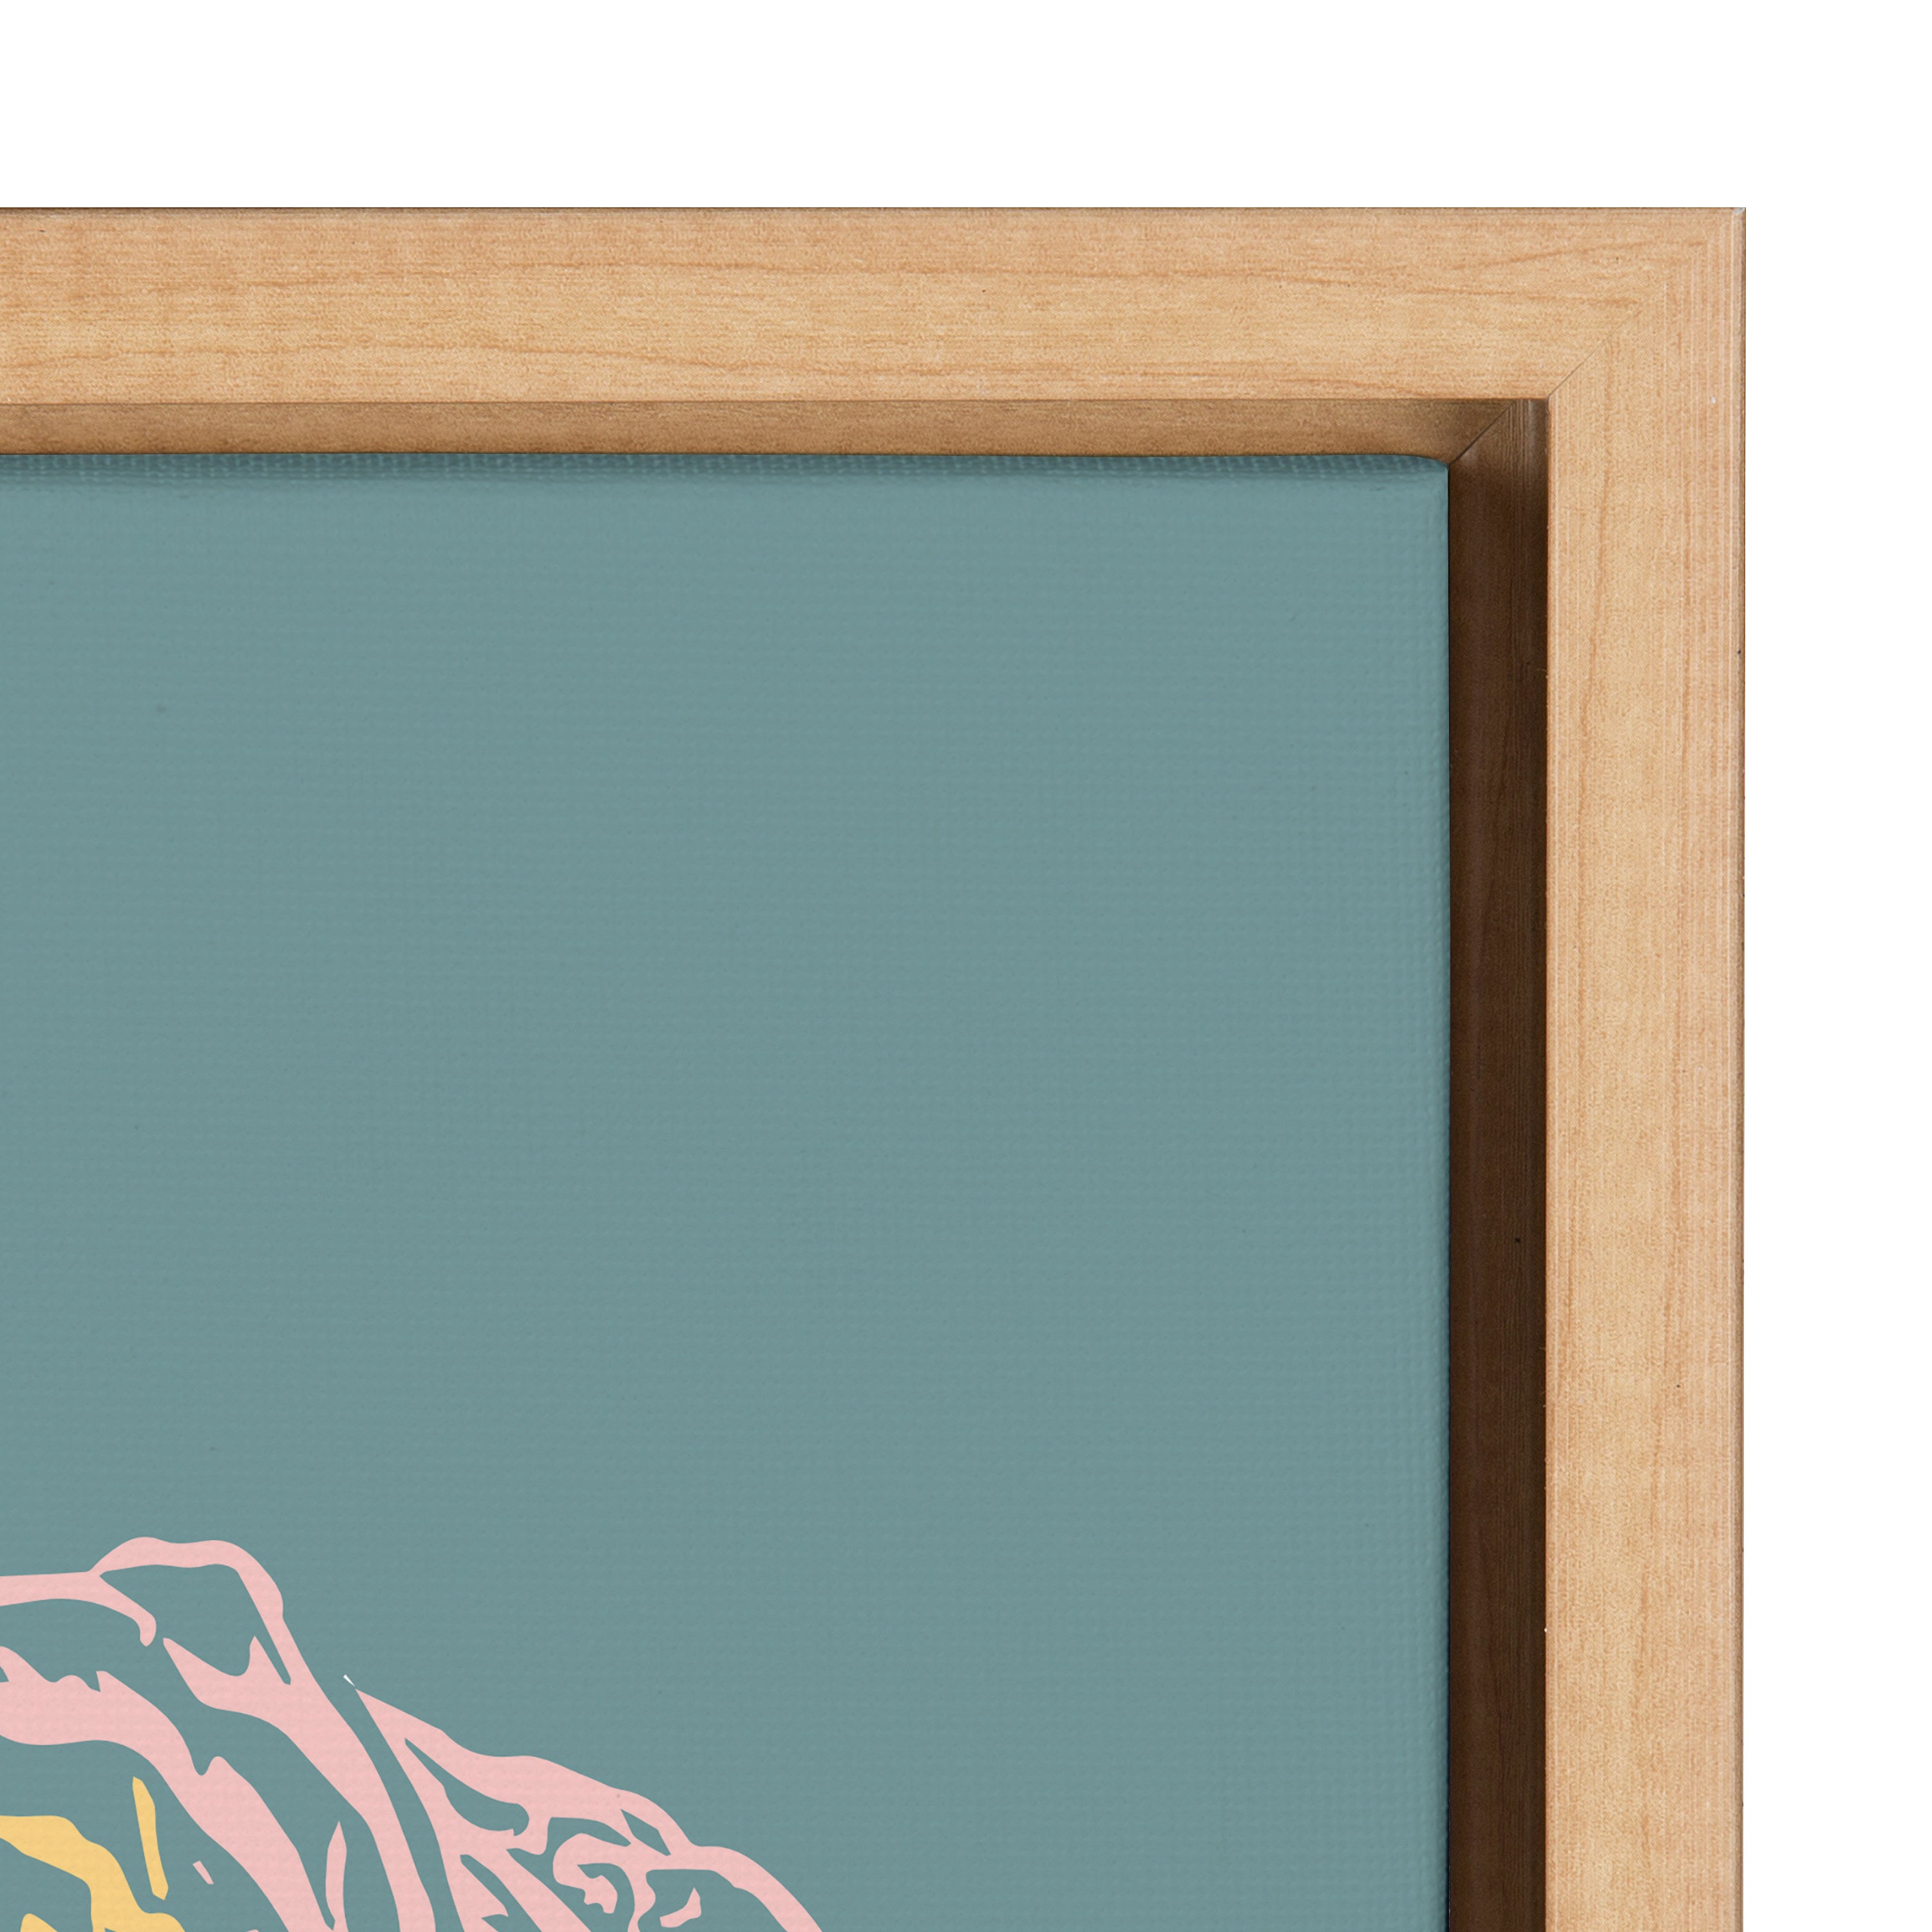 Sylvie Floral in Teal Framed Canvas by Apricot and Birch